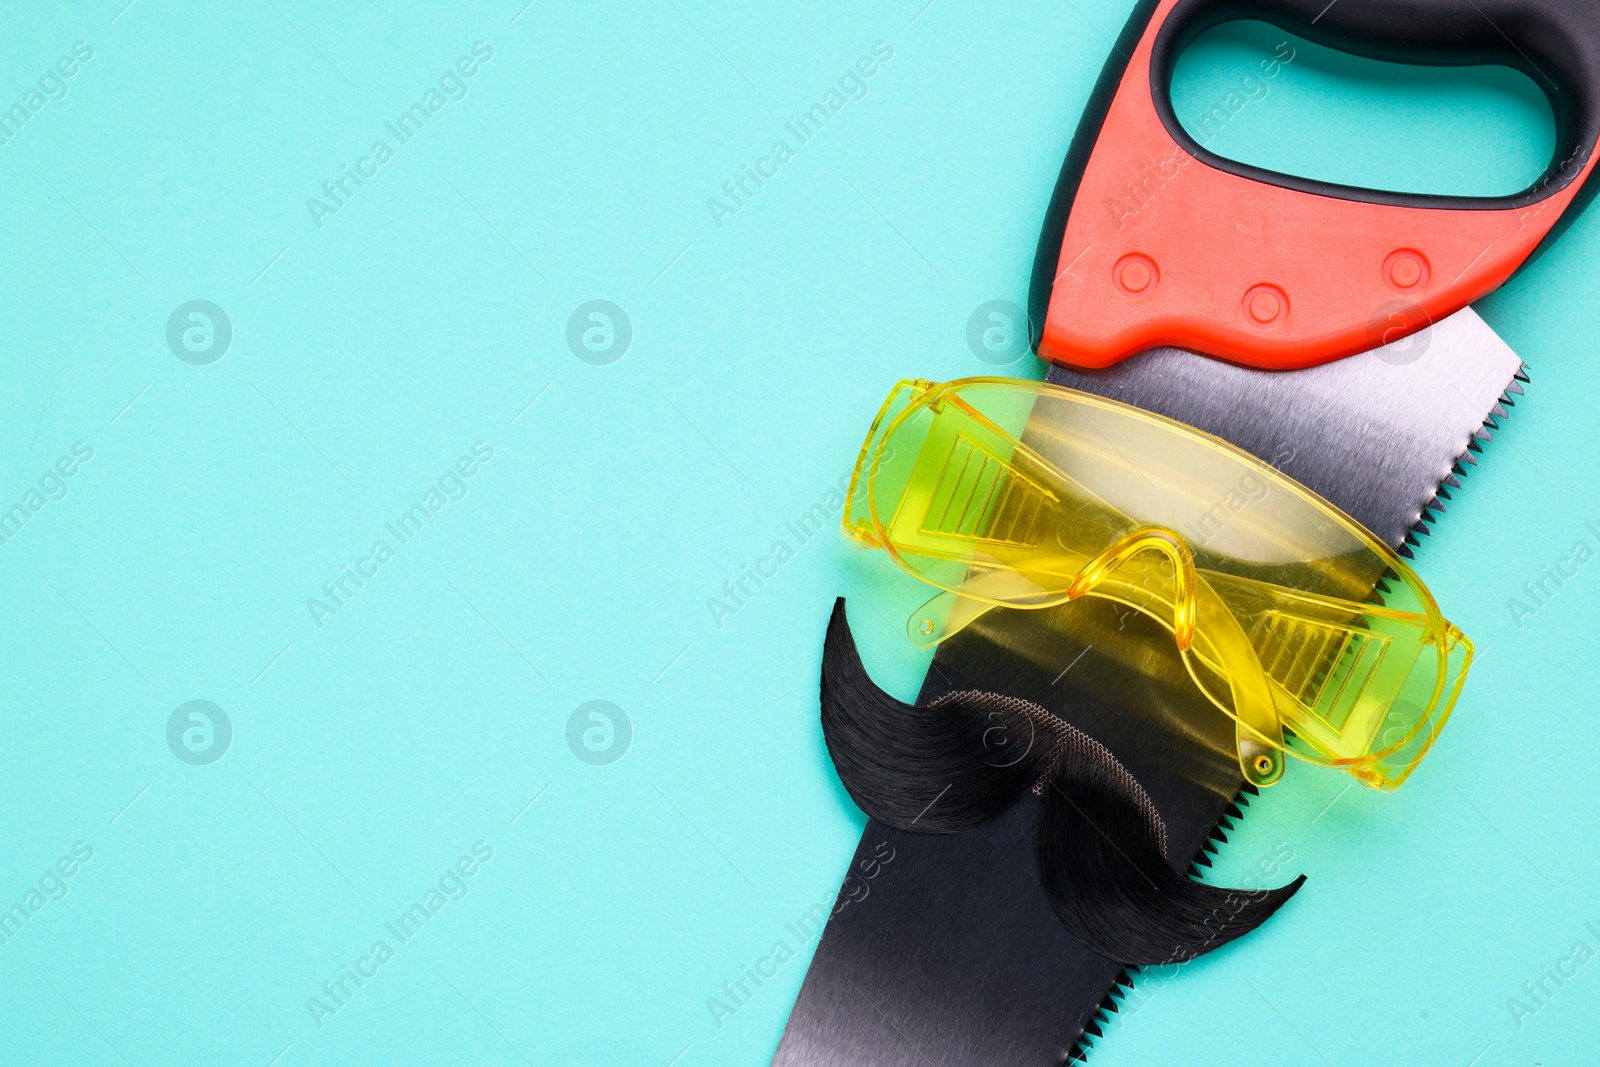 Photo of Man's face made of artificial mustache, safety glasses and hand saw on light blue background, top view. Space for text